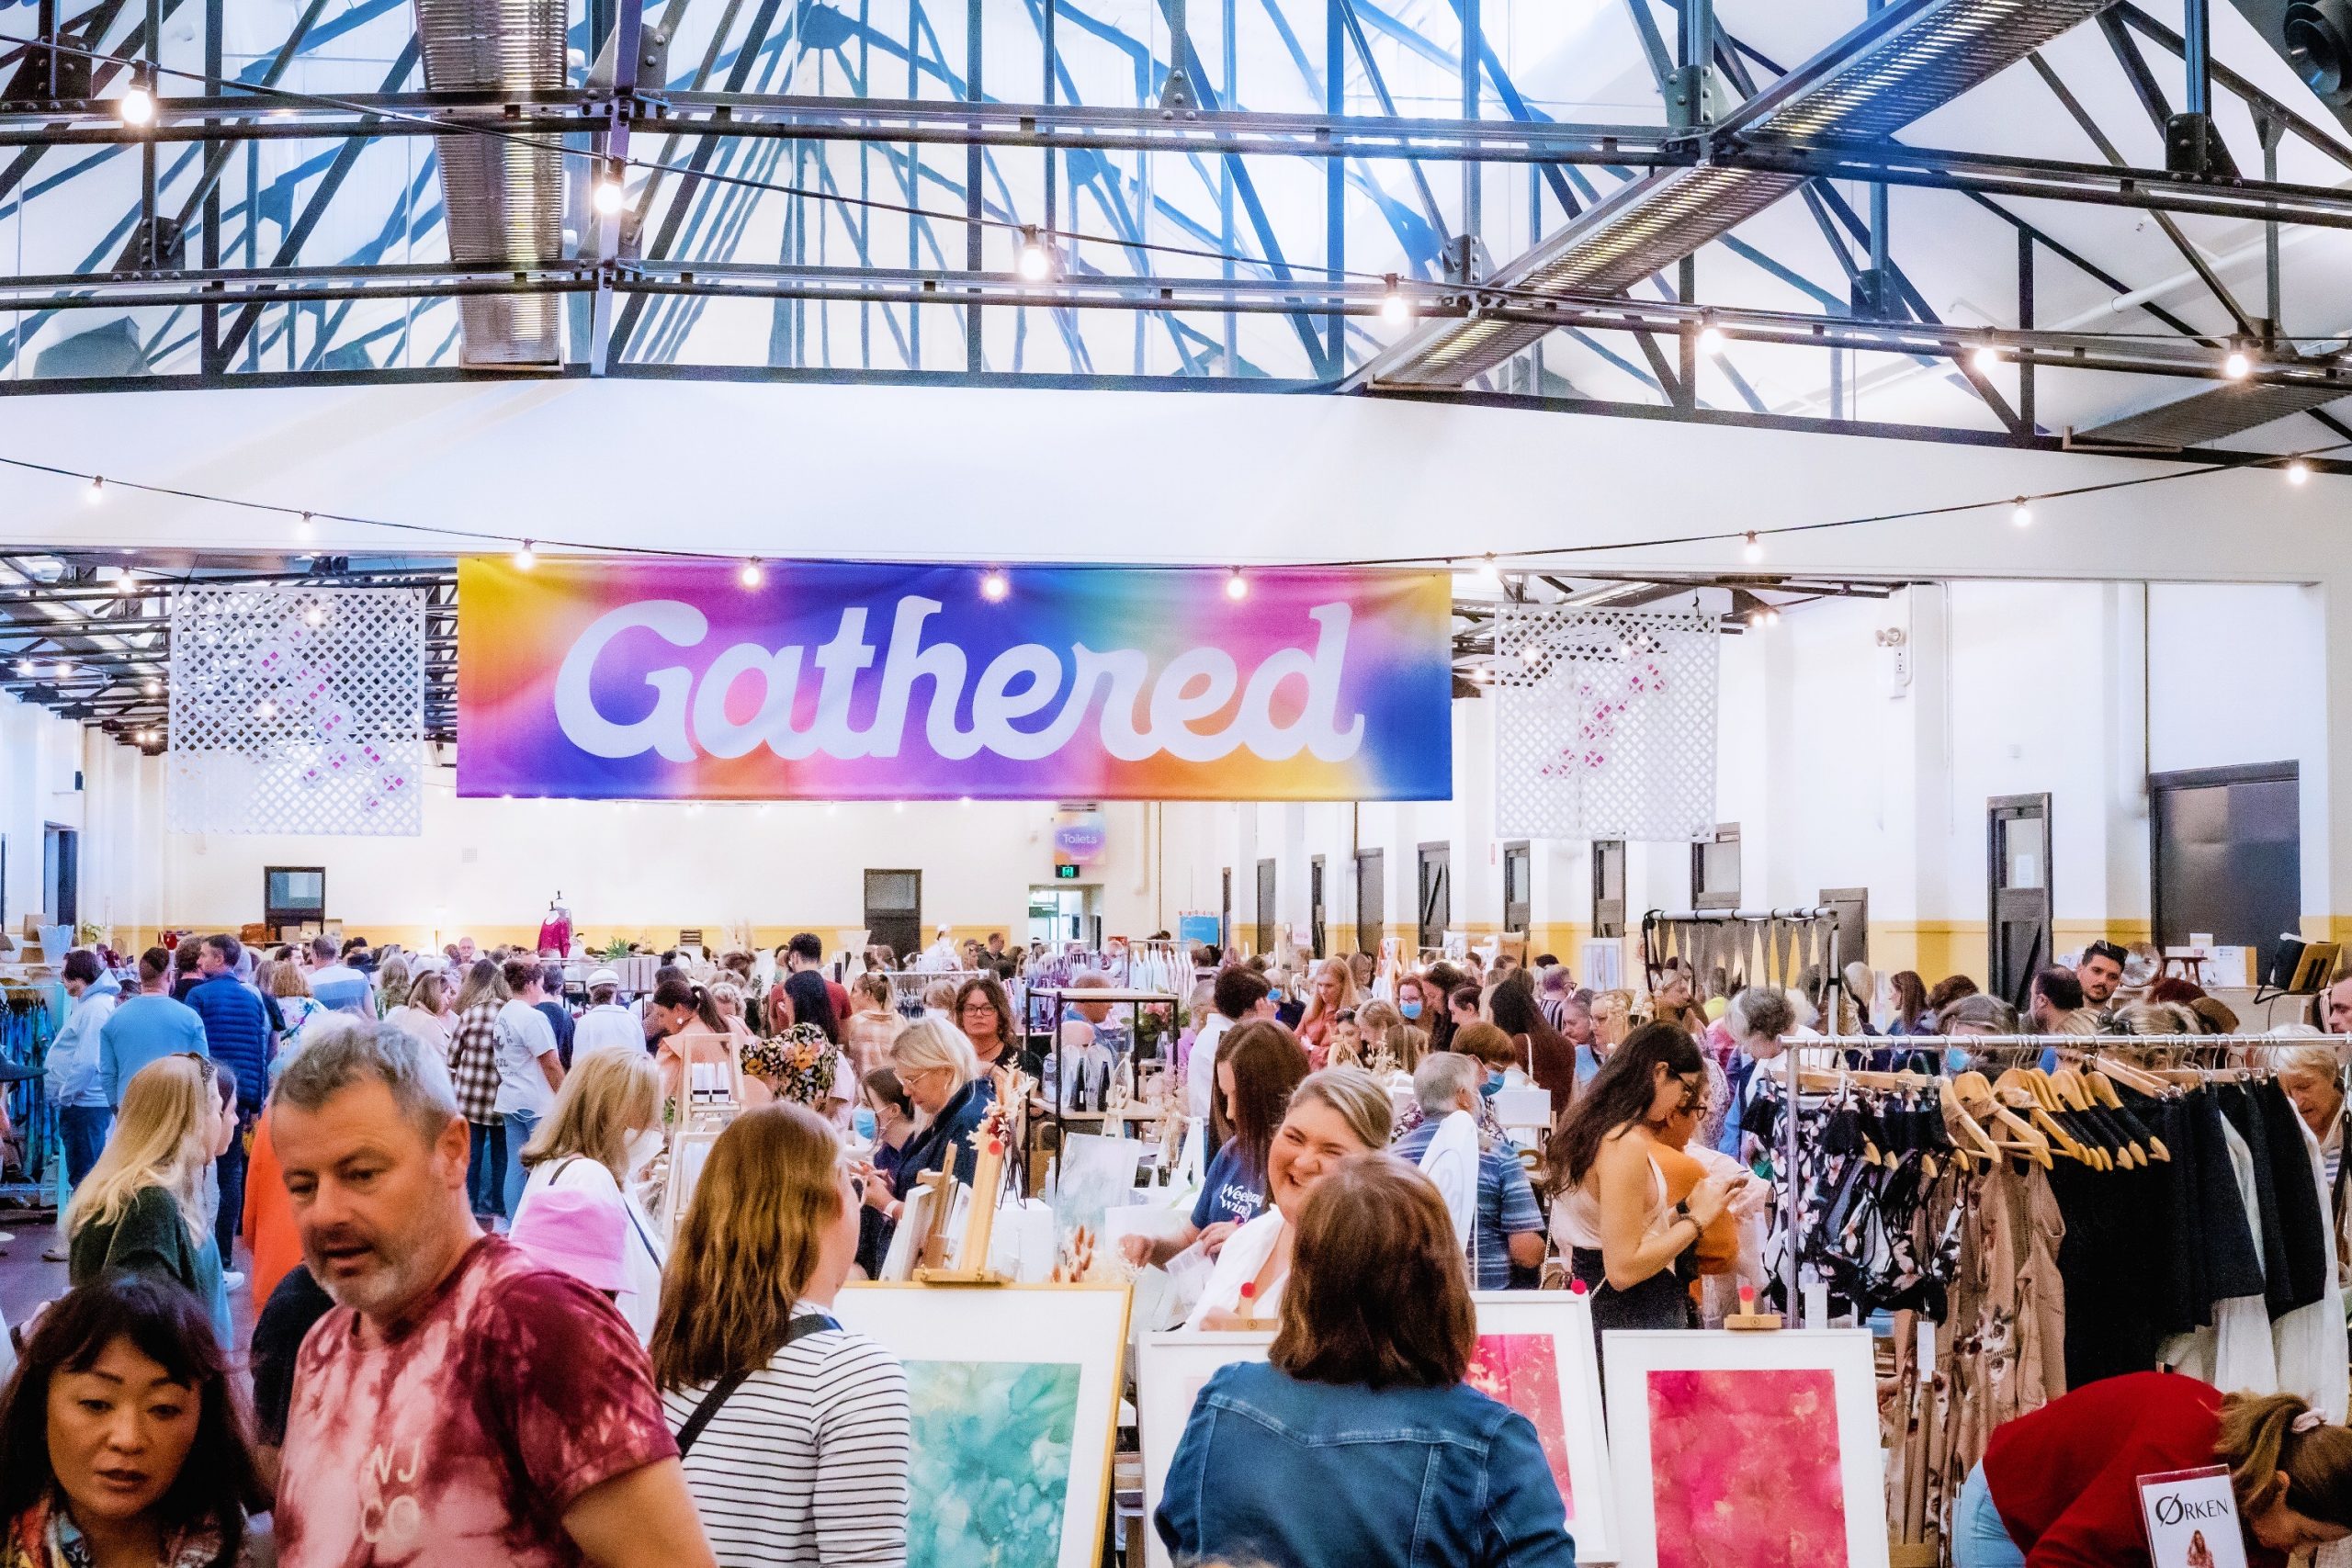 WIN $1800 to spend at Gathered this weekend!